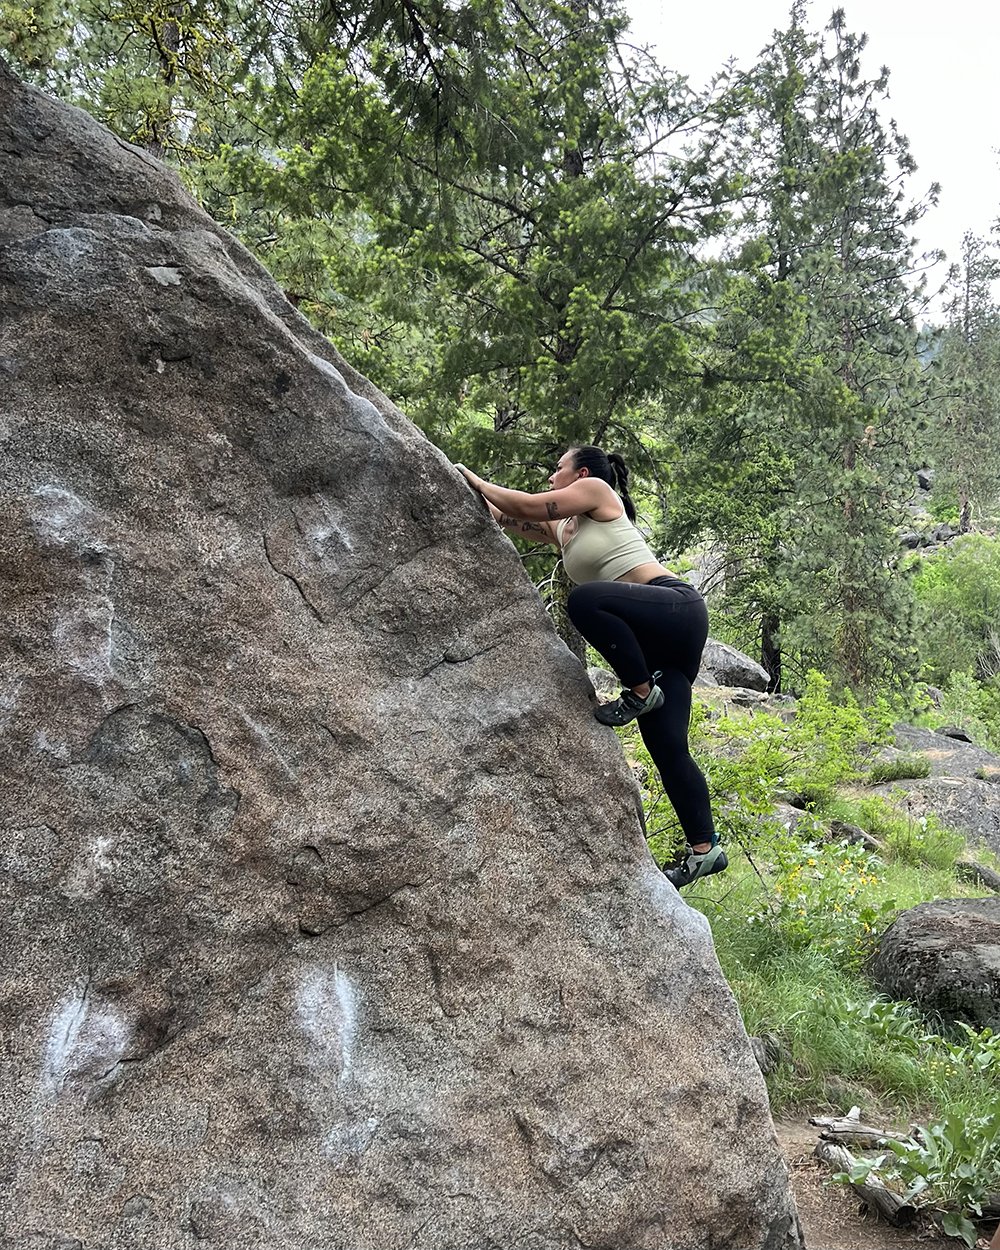  Warming up on a V0 on the Scarecrow Boulder in Forestland.  